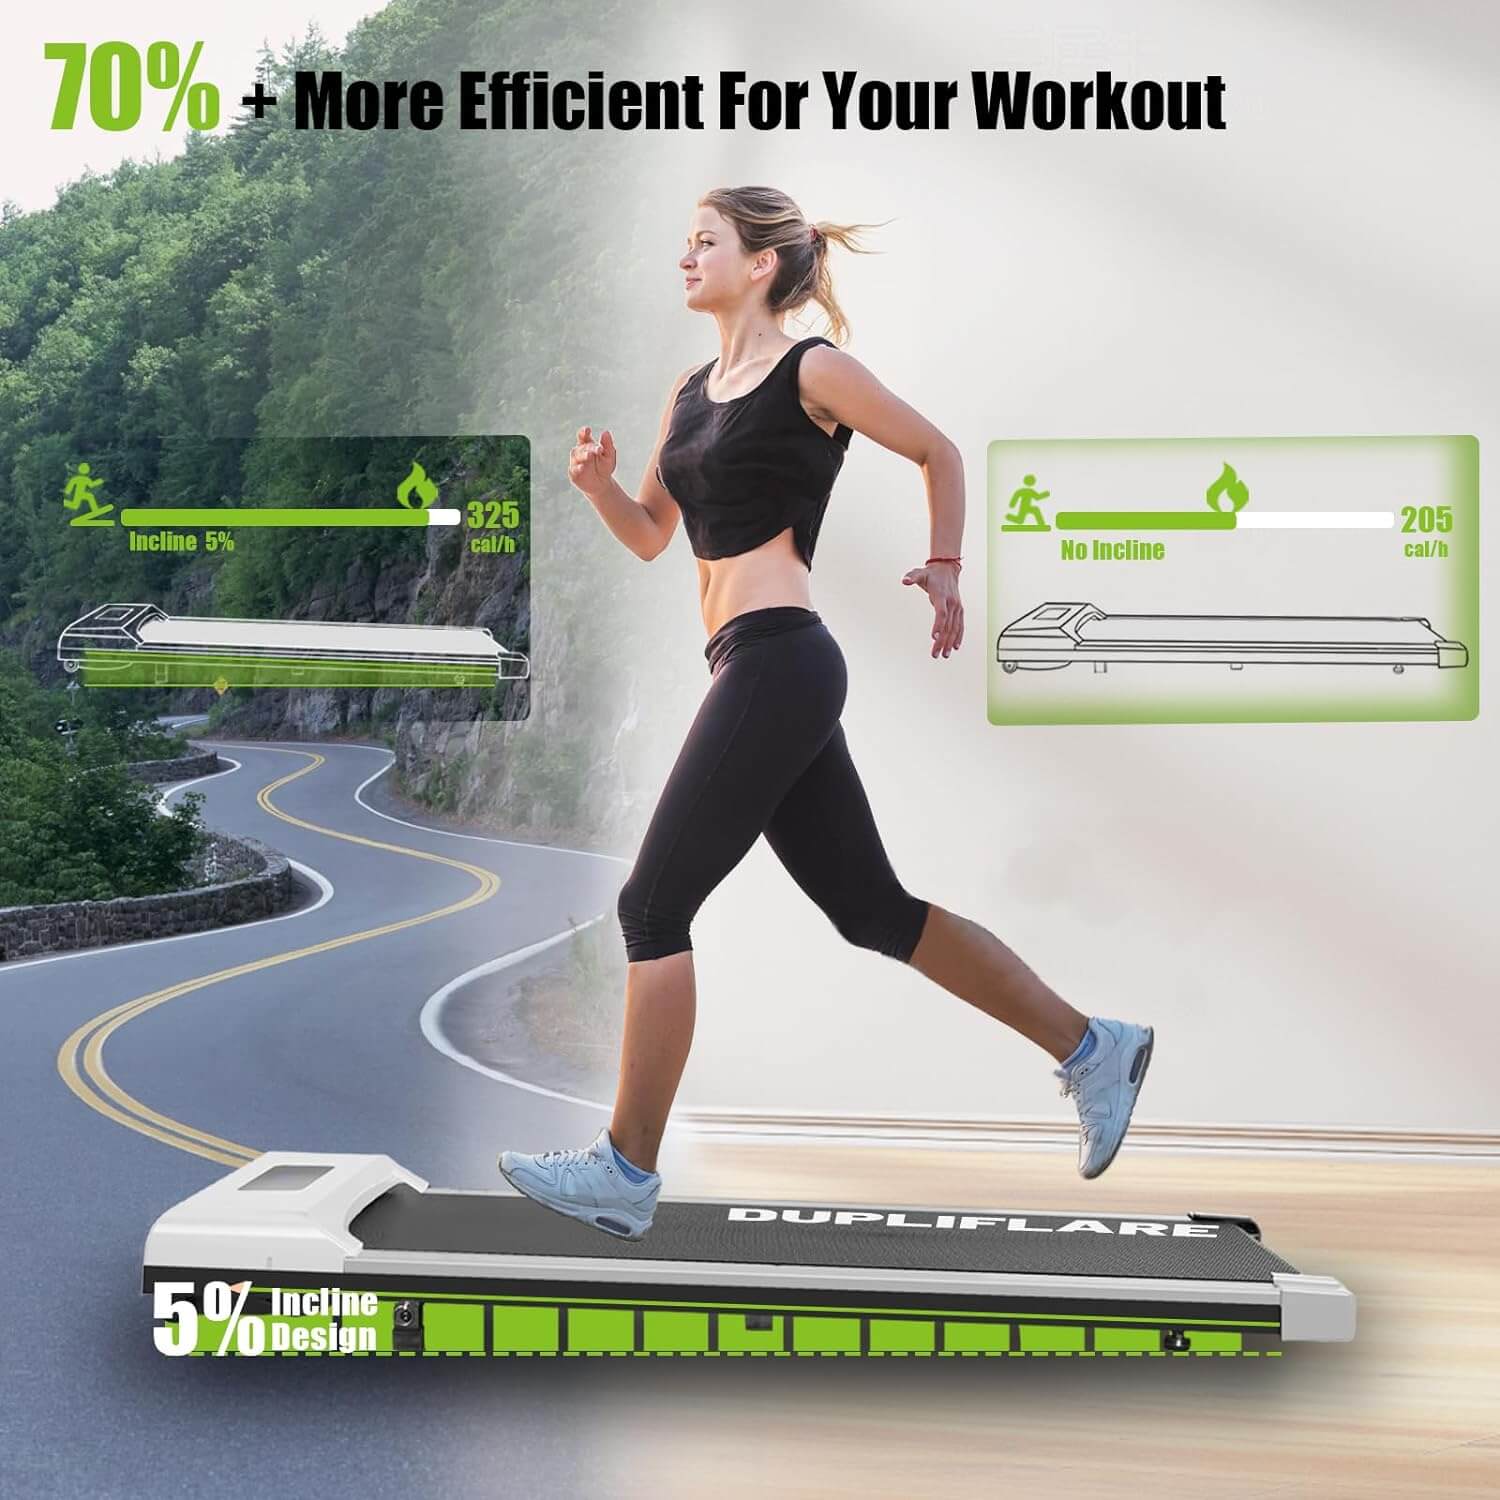 DUPLIFLARE Walking Pad With Incline product description about the efficient of workout.